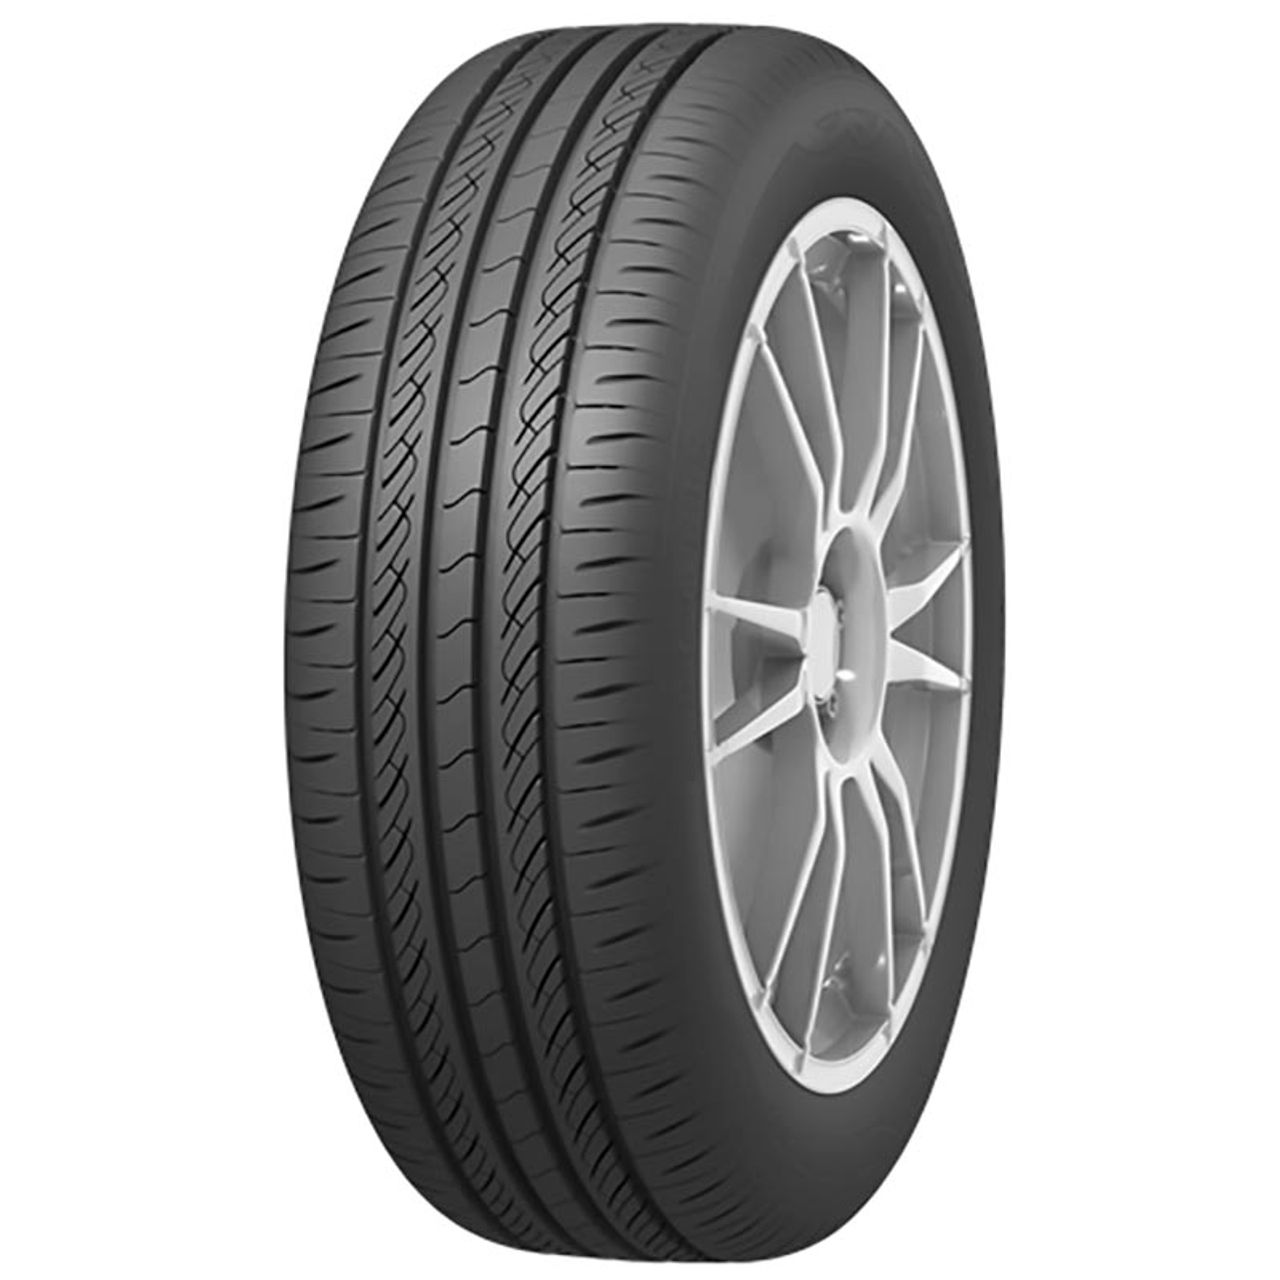 INFINITY ECOSIS 195/55R16 91V BSW